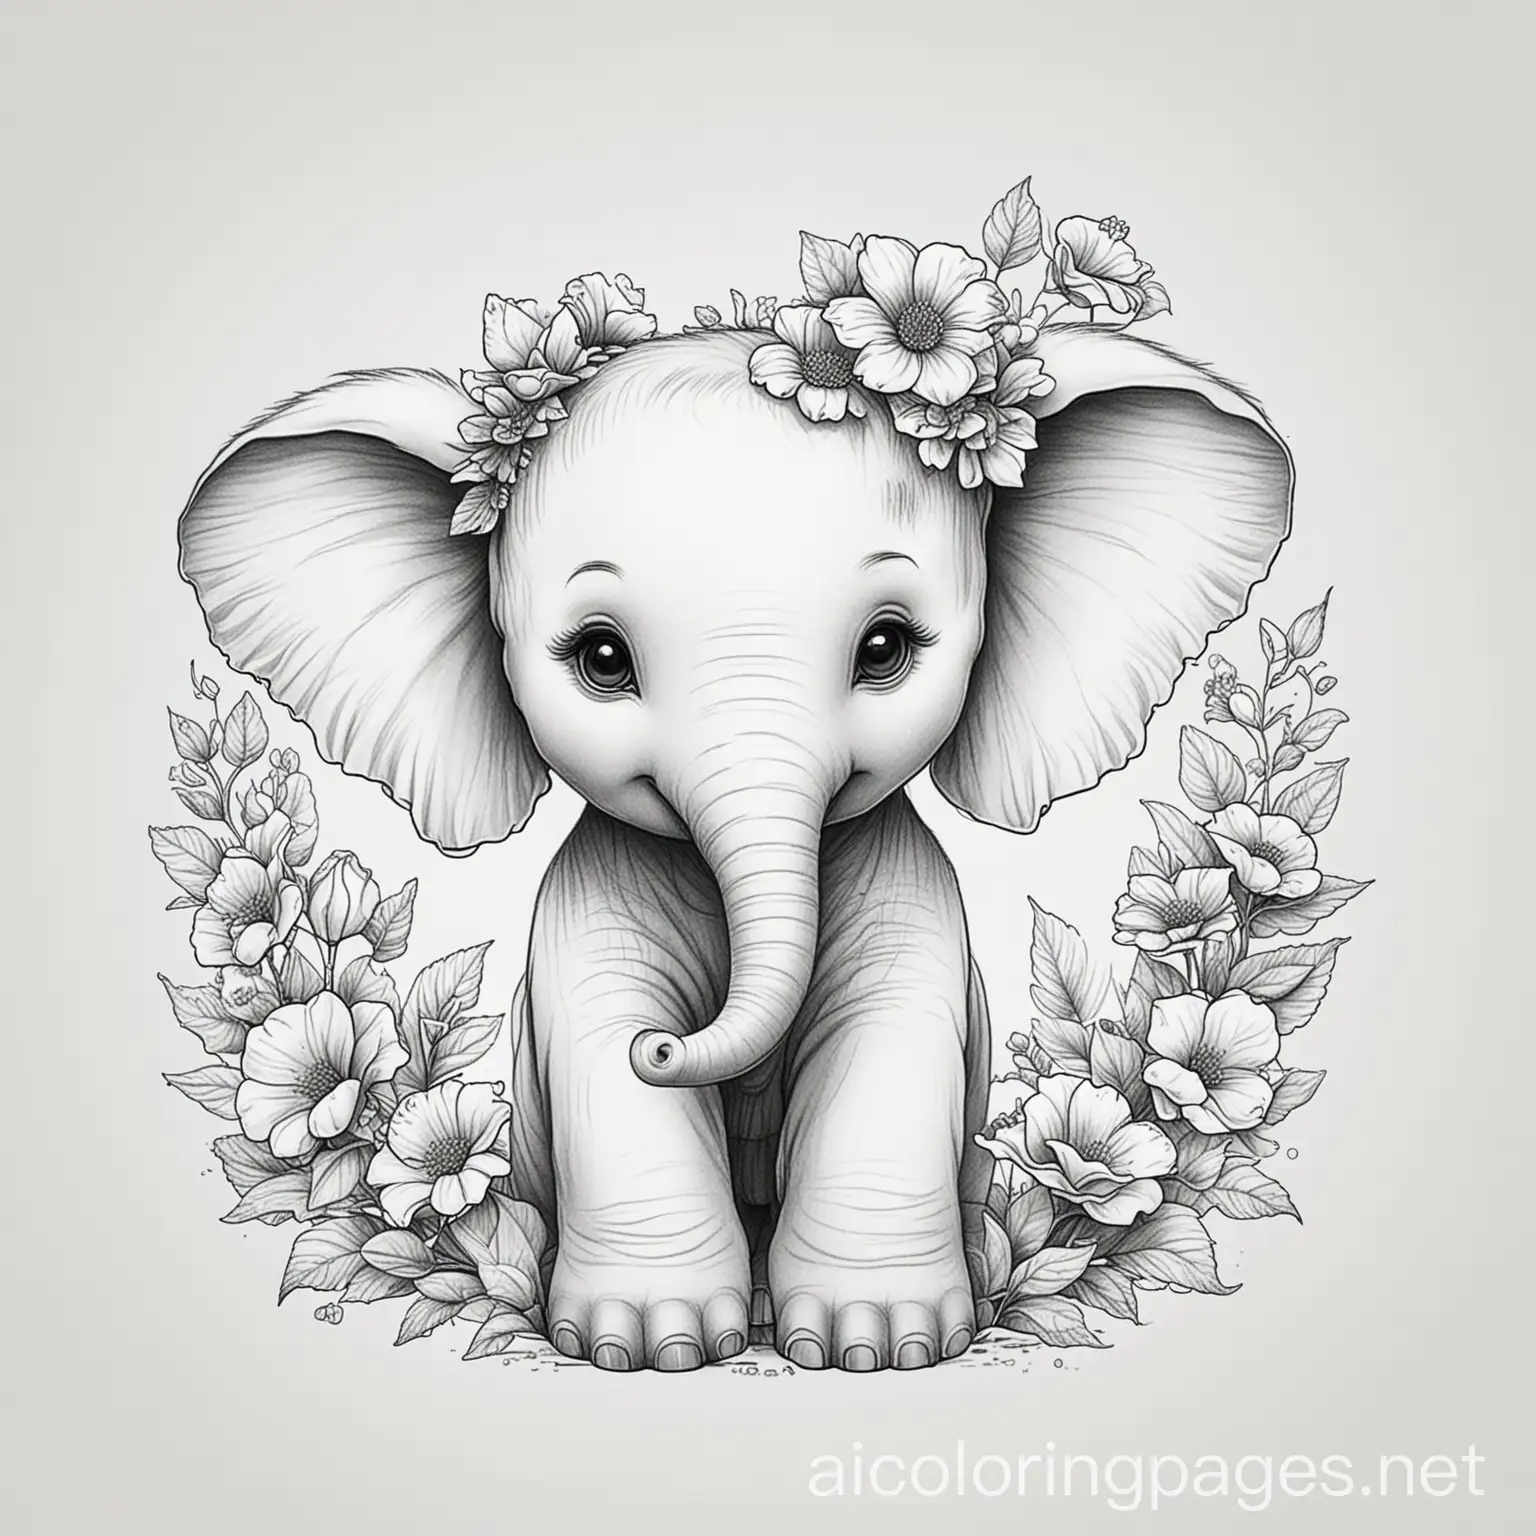 Adorable-Baby-Elephant-with-Flowers-Coloring-Page-for-Nursery-Decor